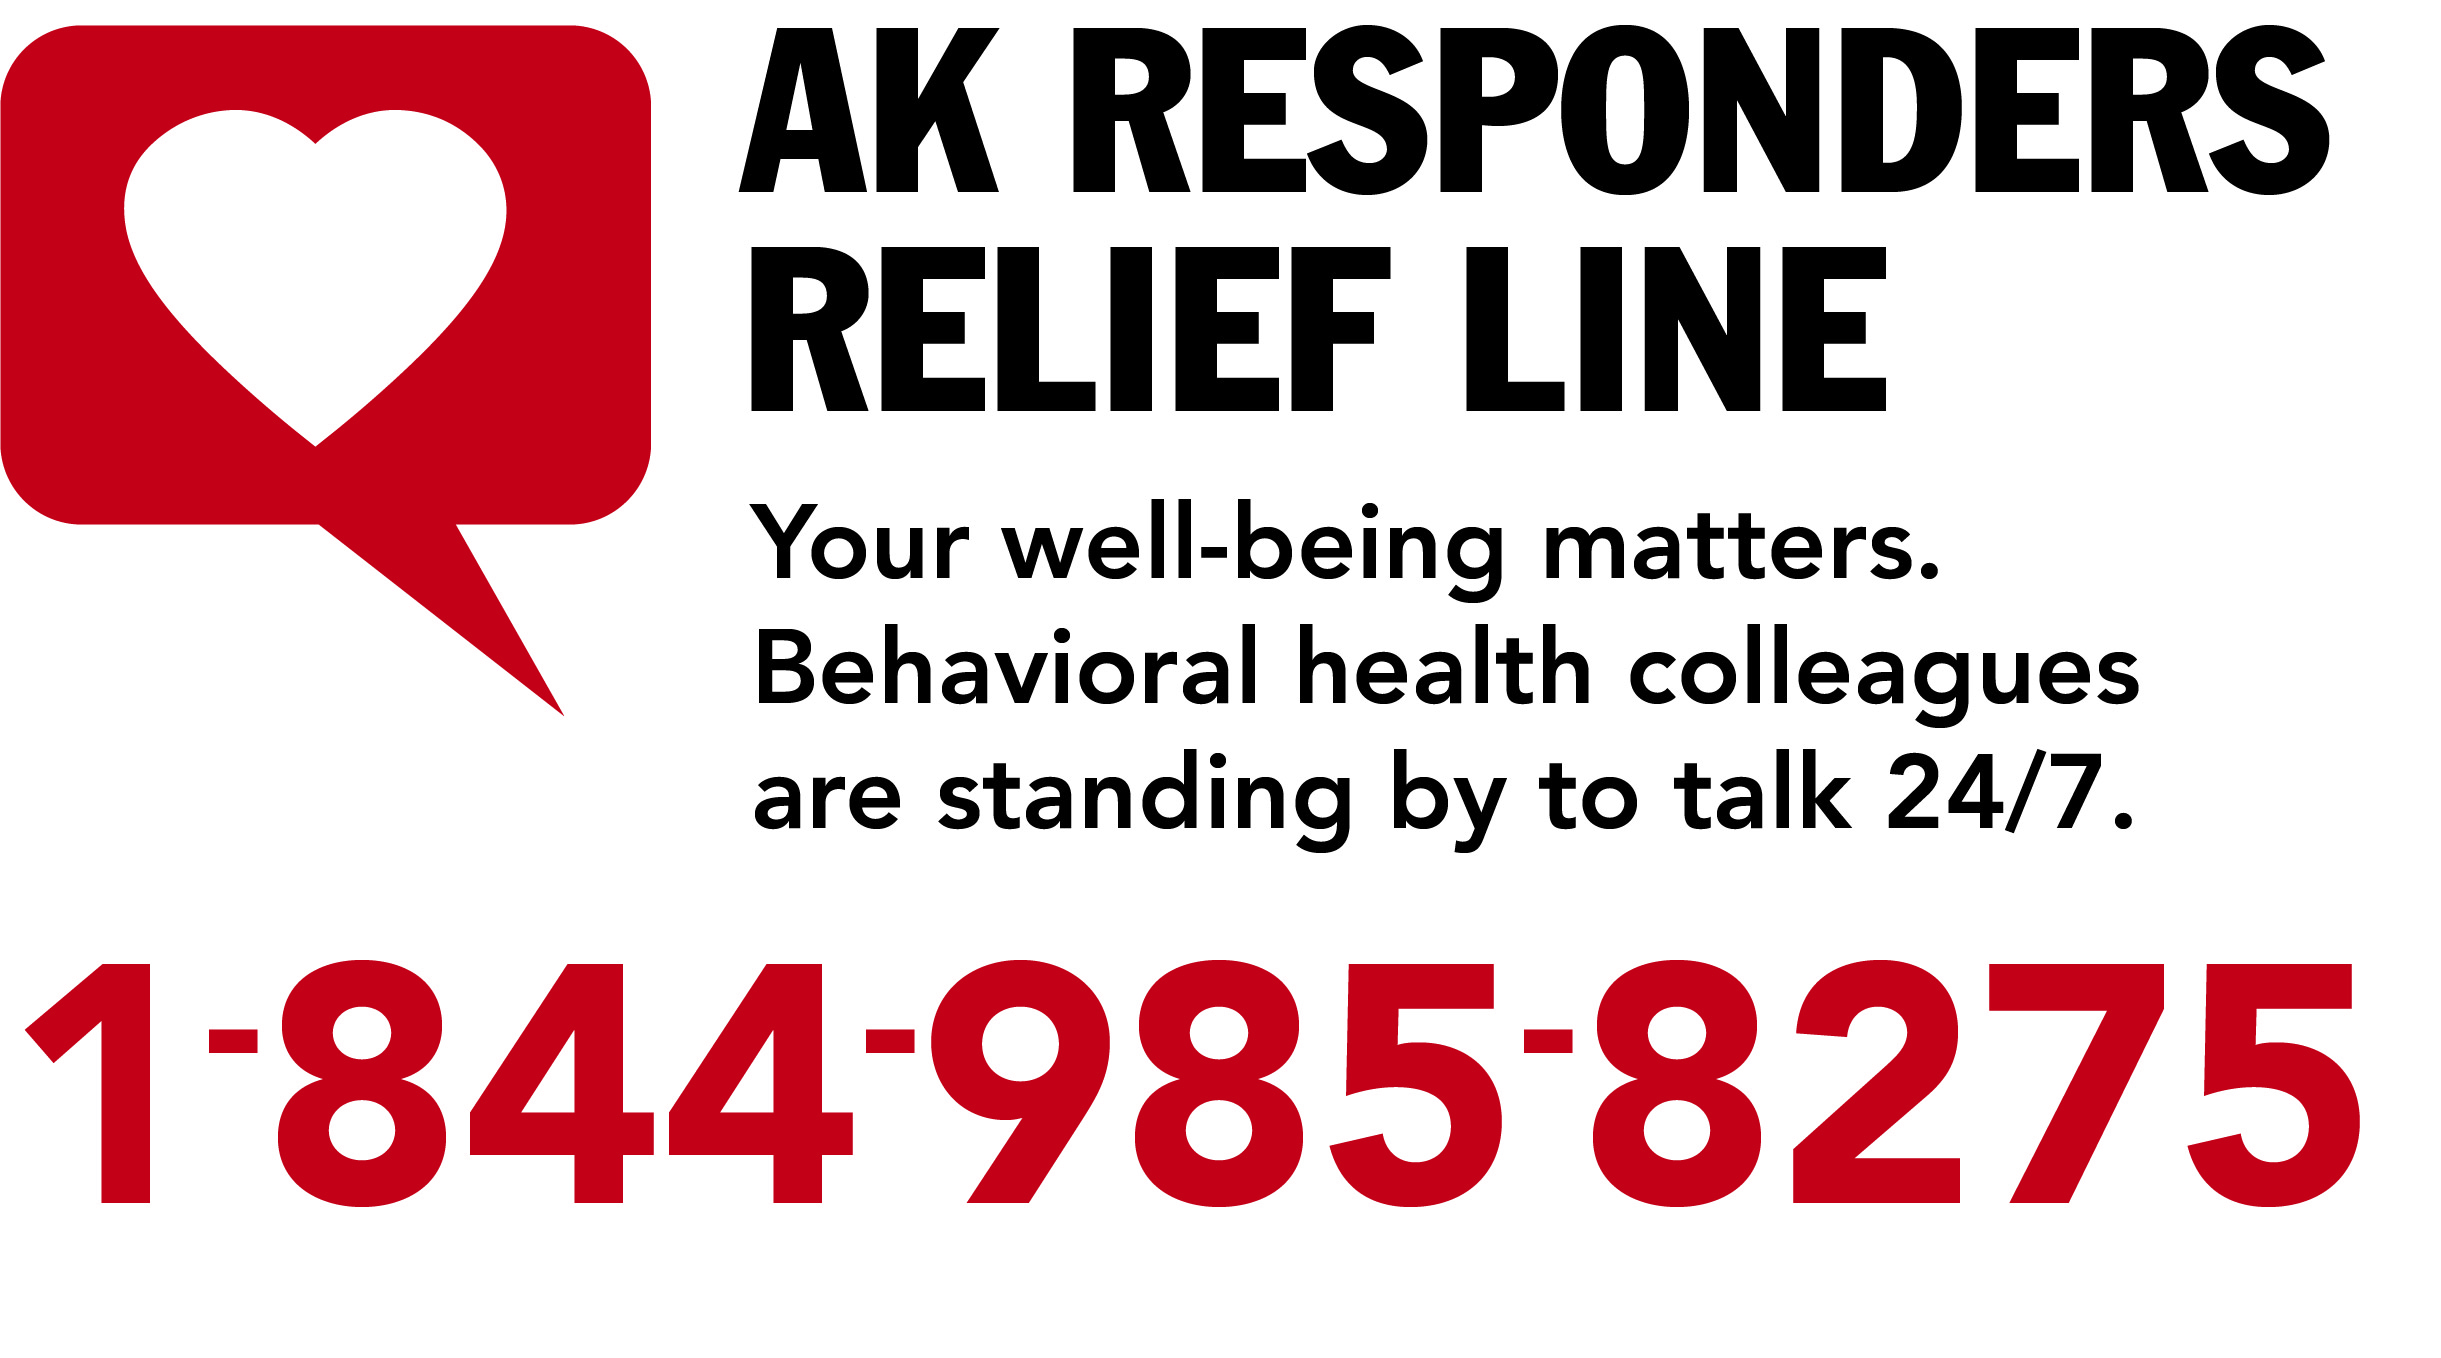 AK Responders Relief Line: Your well-being matters. Your behavioral health collegues are standing by to talk 24/7: 844-985-8275